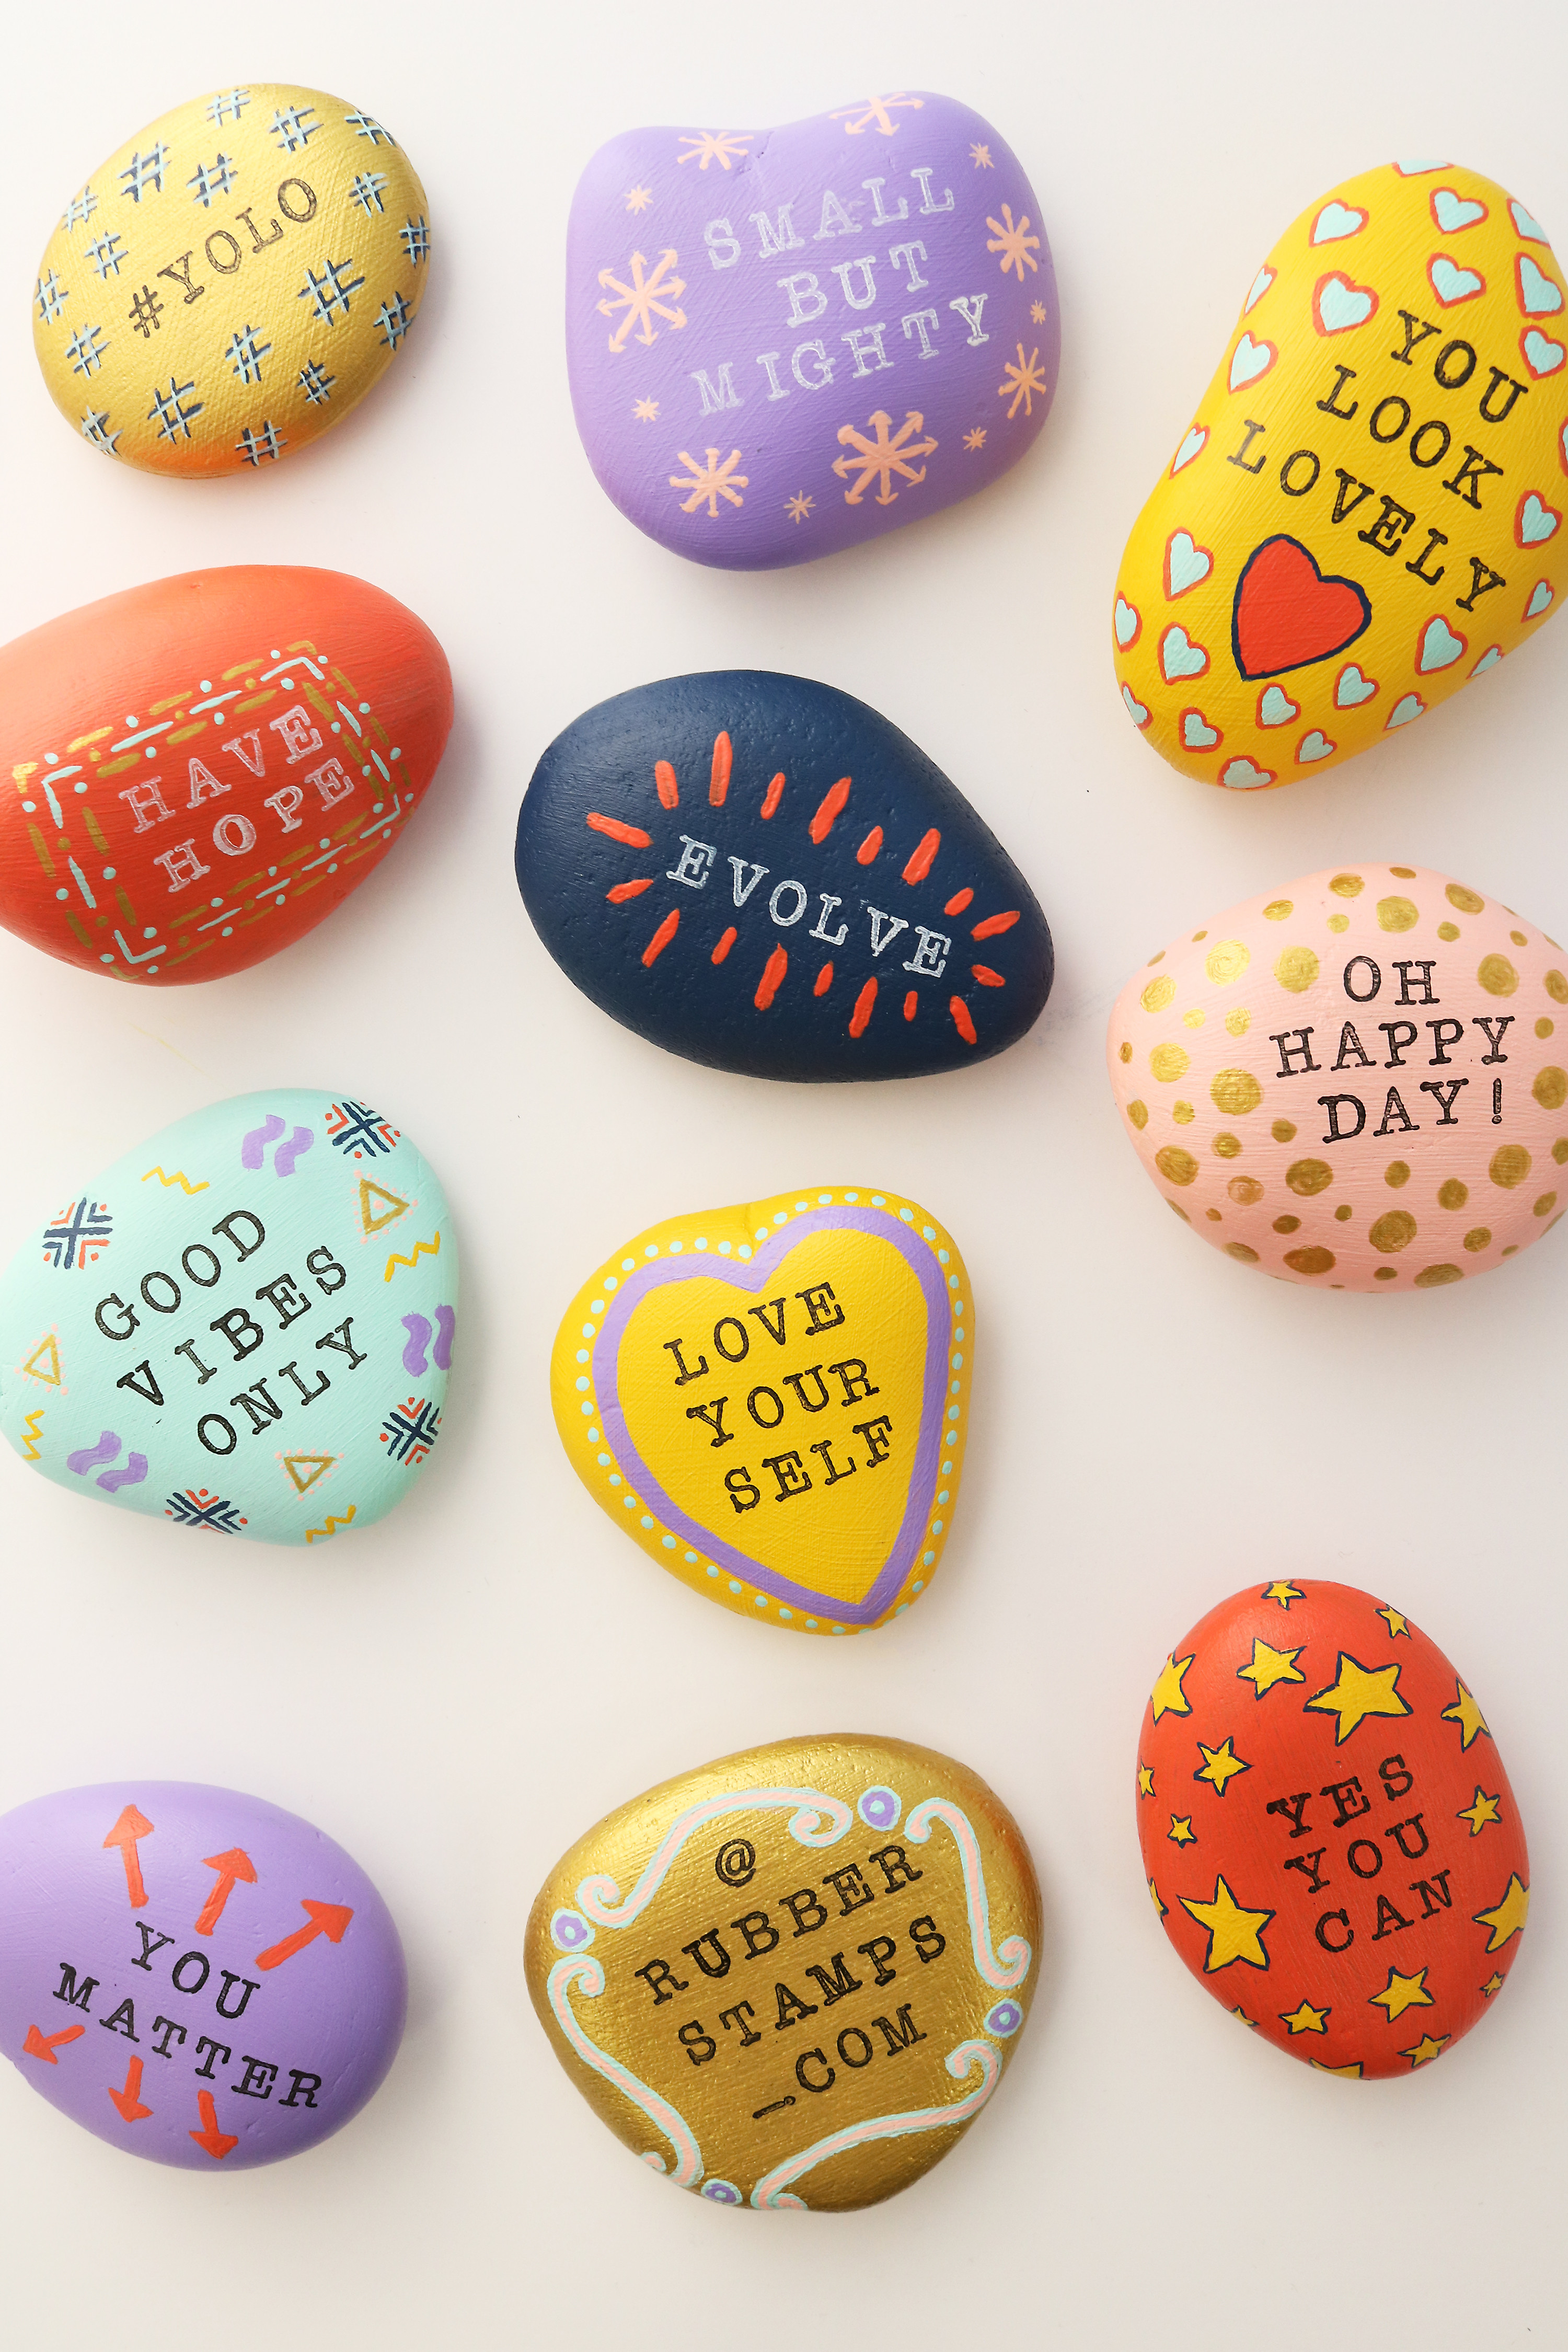 Kindness Rocks Quotes
 The Kindness Rocks Project RubberStamps Blog